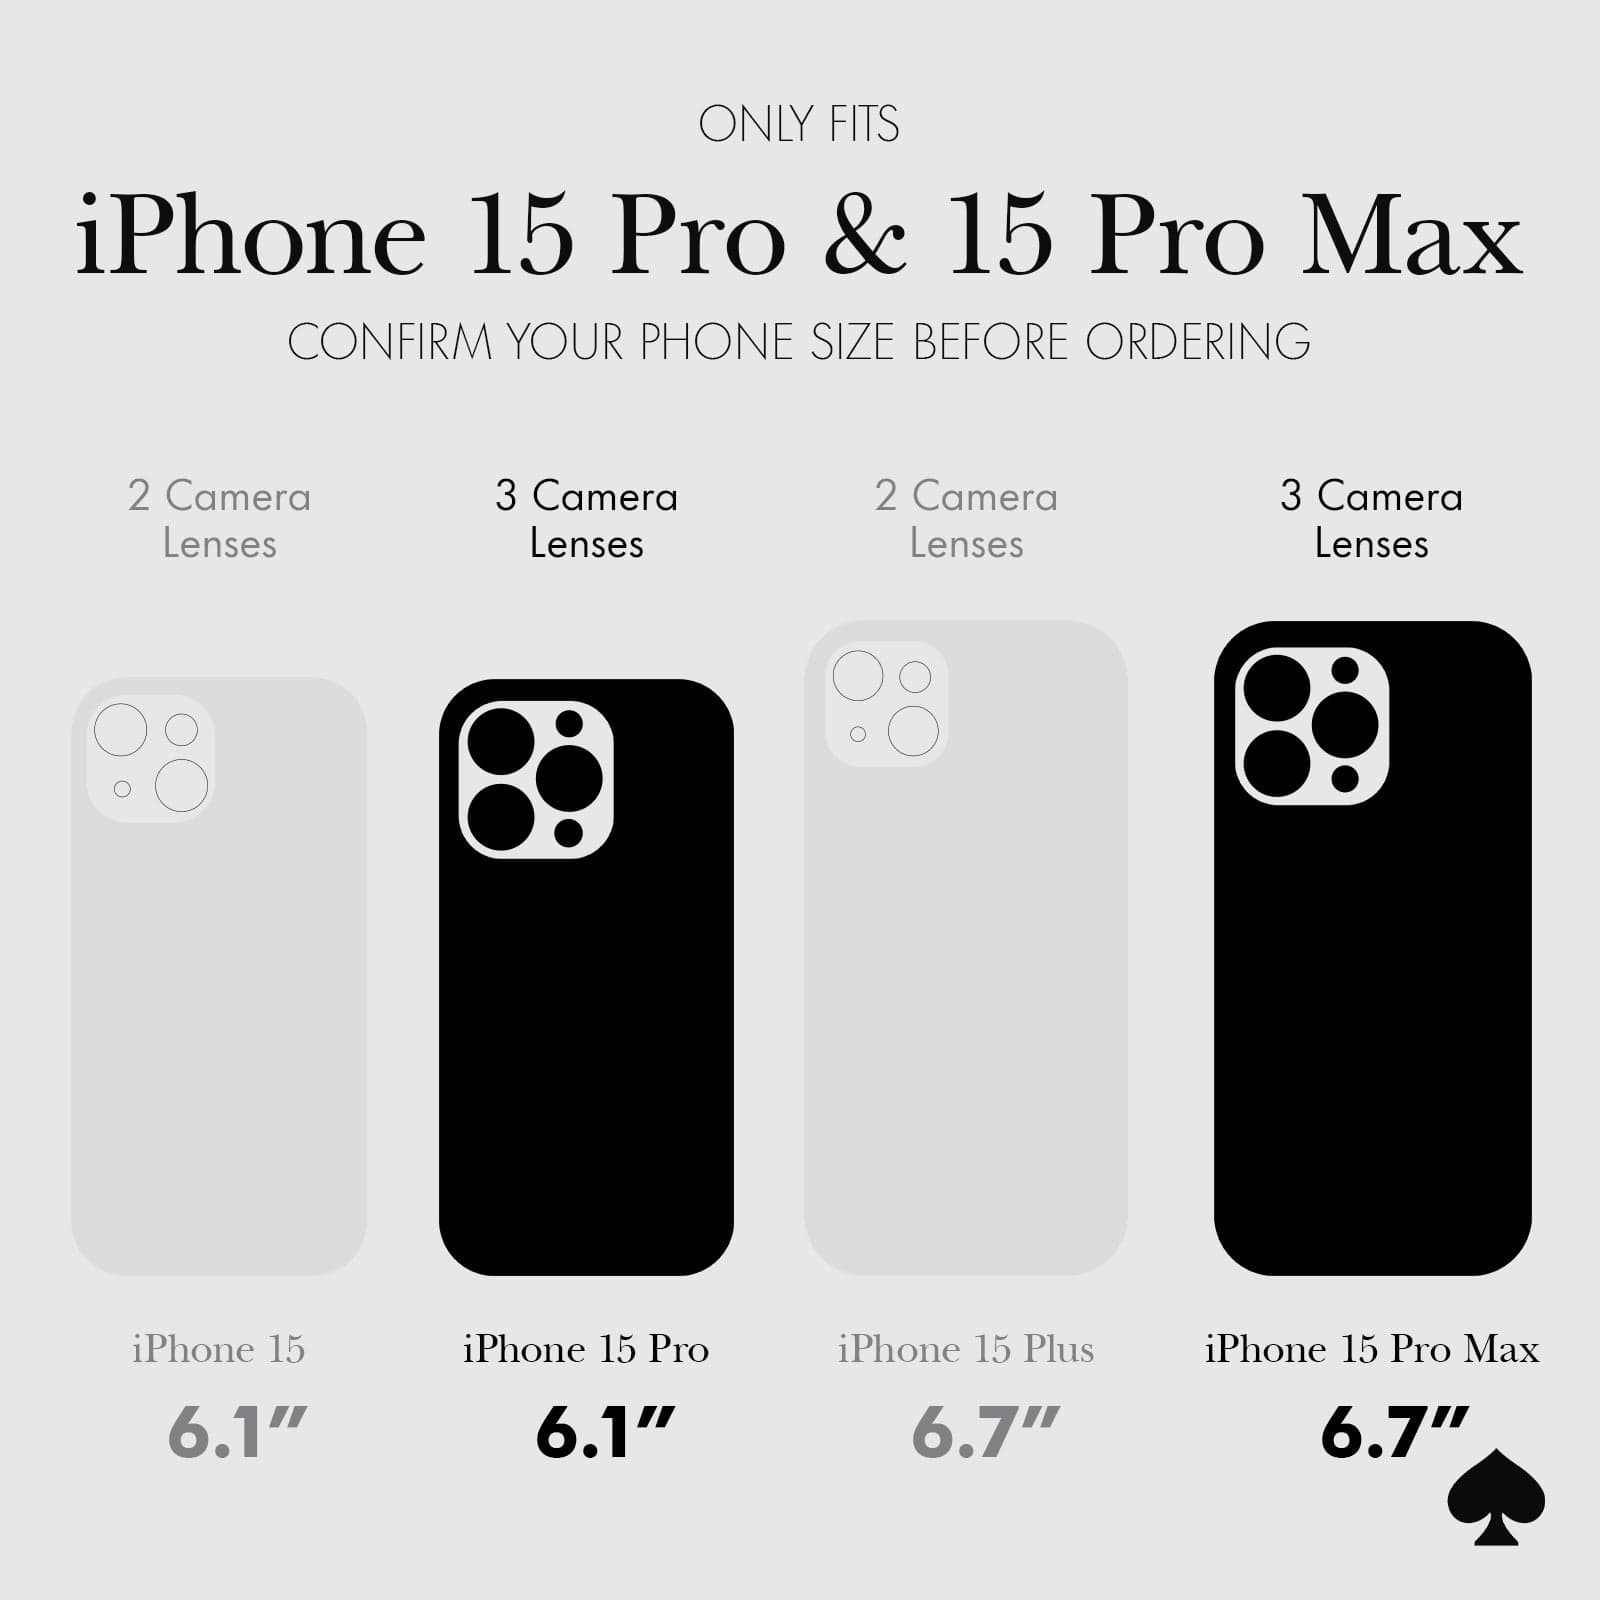 ONLY FITS IPHONE 15 PRO & 15 PRO MAX. CONFIRM YOUR PHONE SIZE BEFORE ORDERING